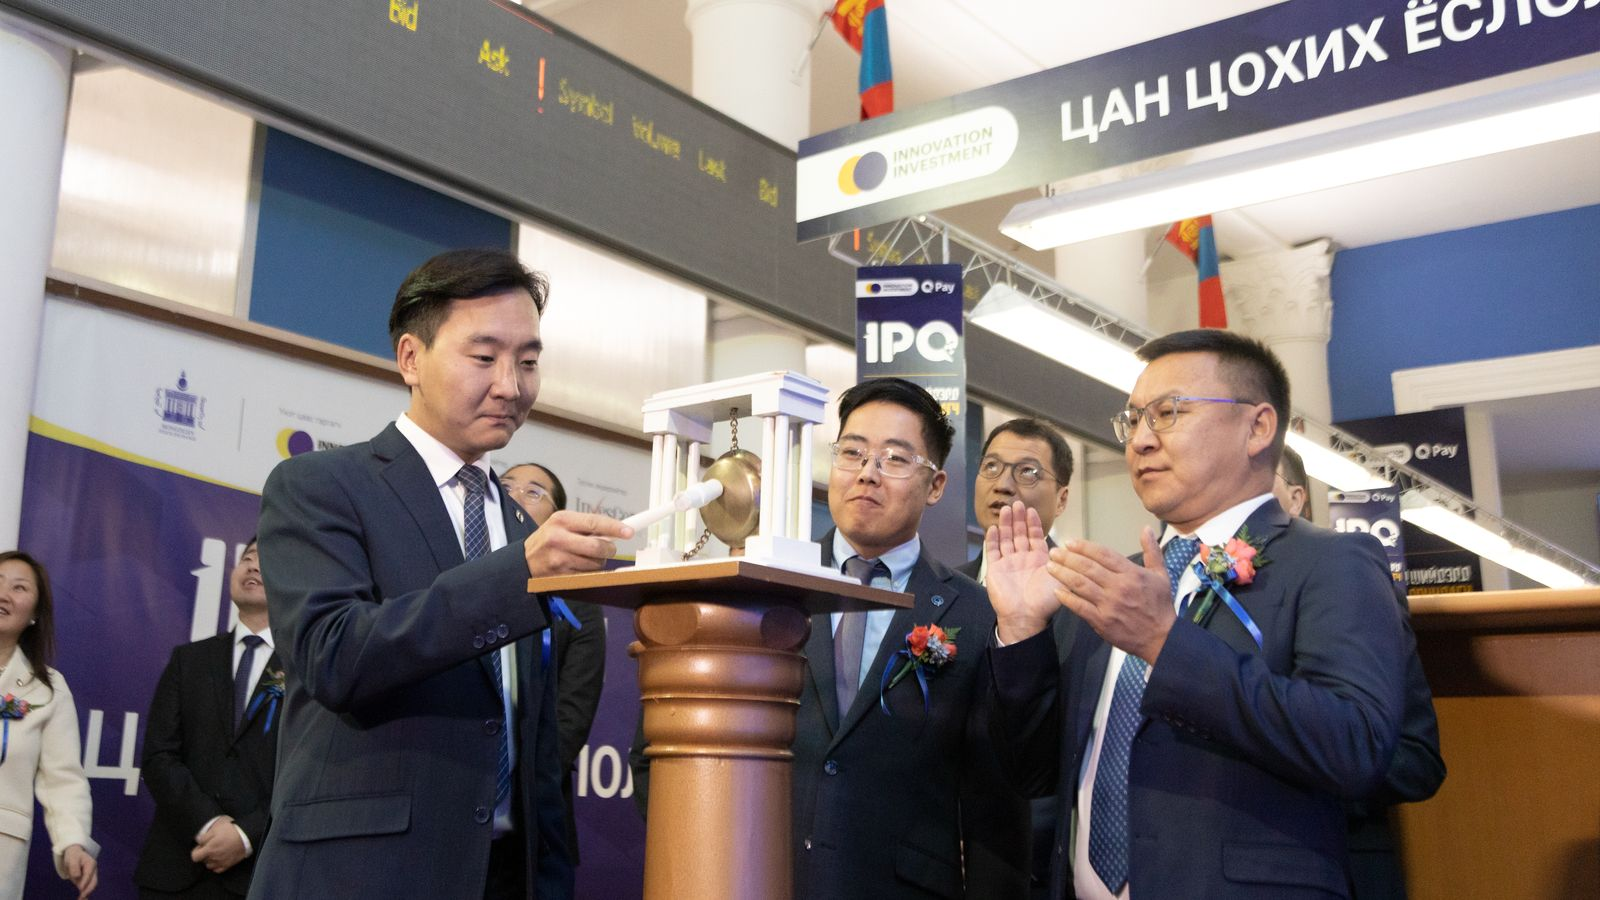 Mongolian QPay creator, Innovation investment launches IPO